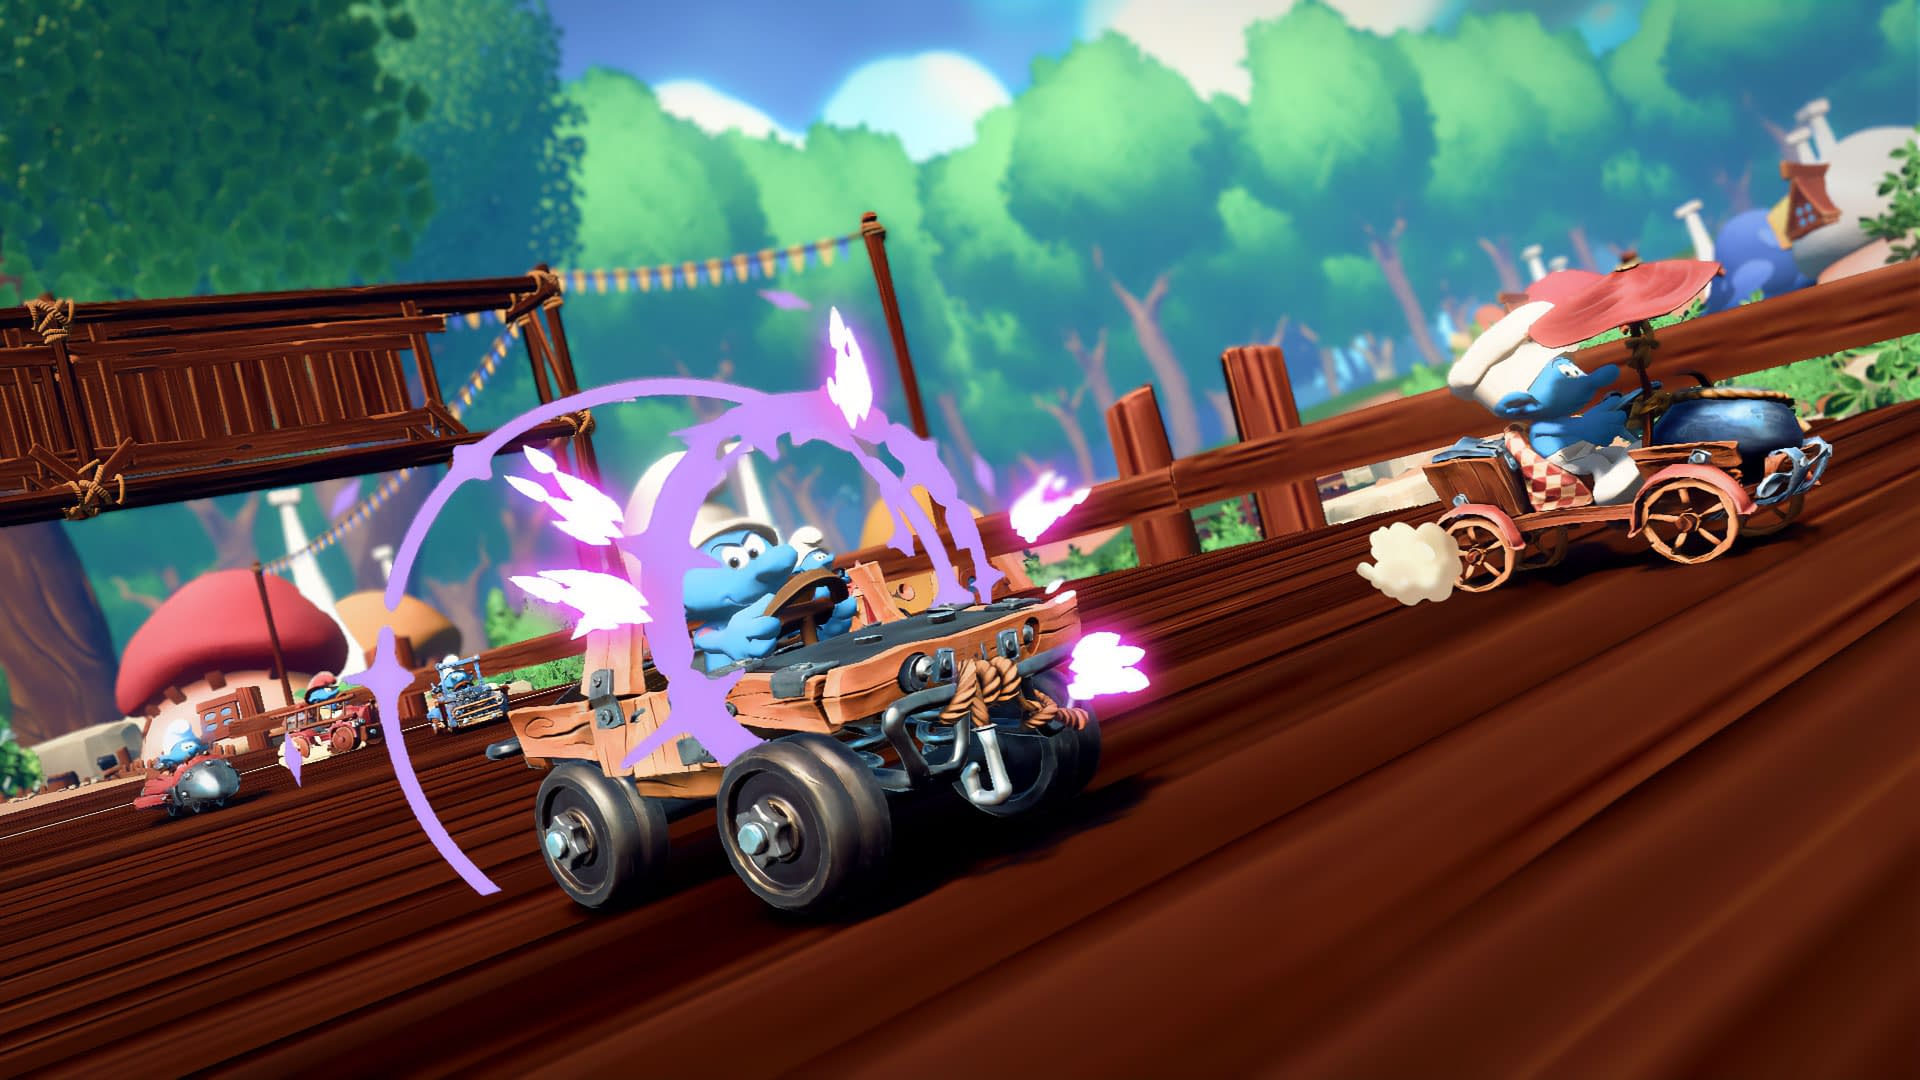 Racing Game Smurfs Kart Release Date Announced